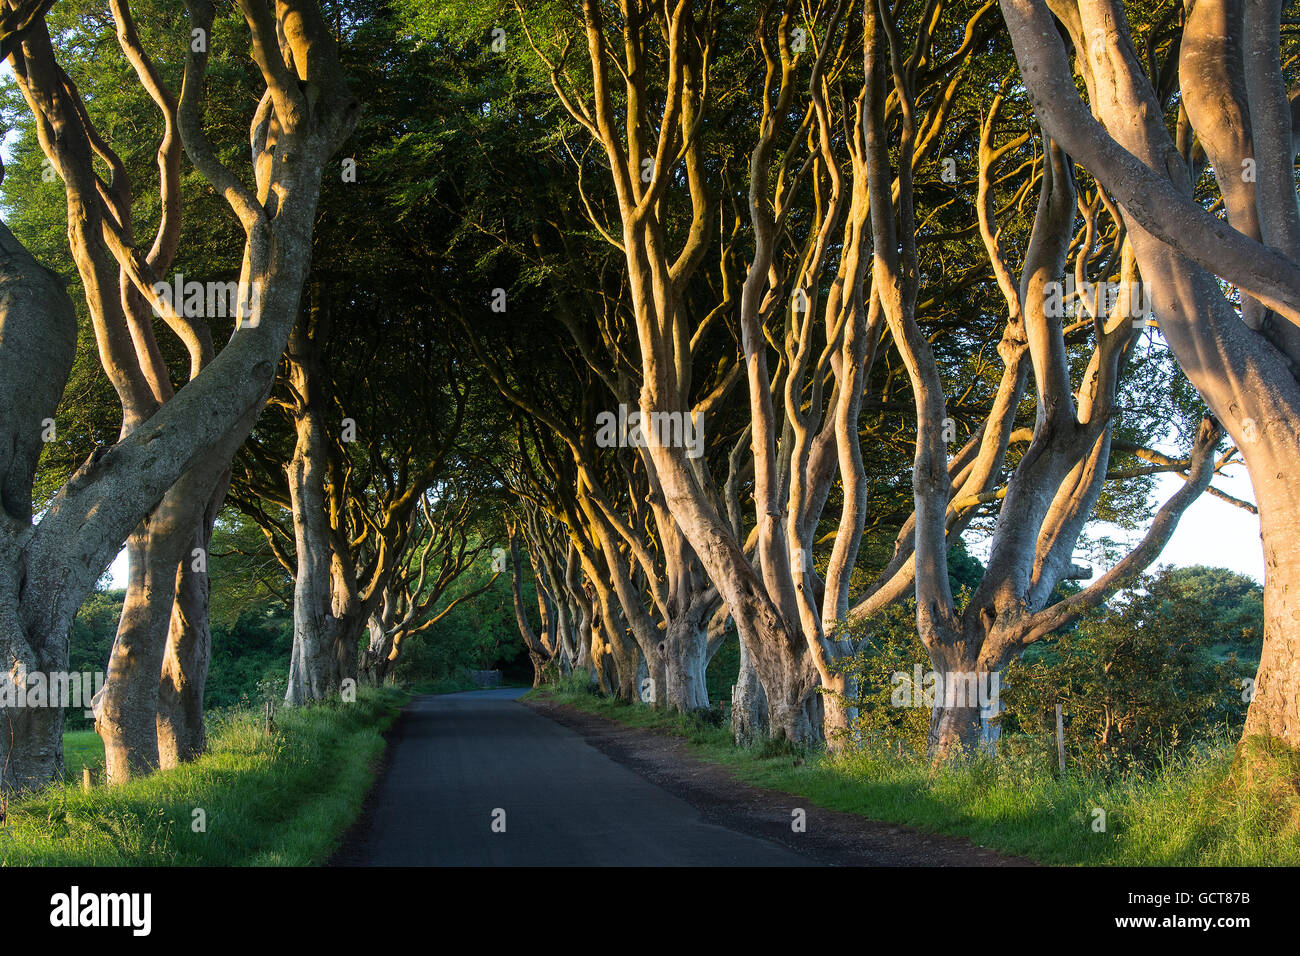 Early morning sunlight on the 'Dark Hedges' - an avenue of ancient trees in County Antrim in Northern Ireland. Stock Photo